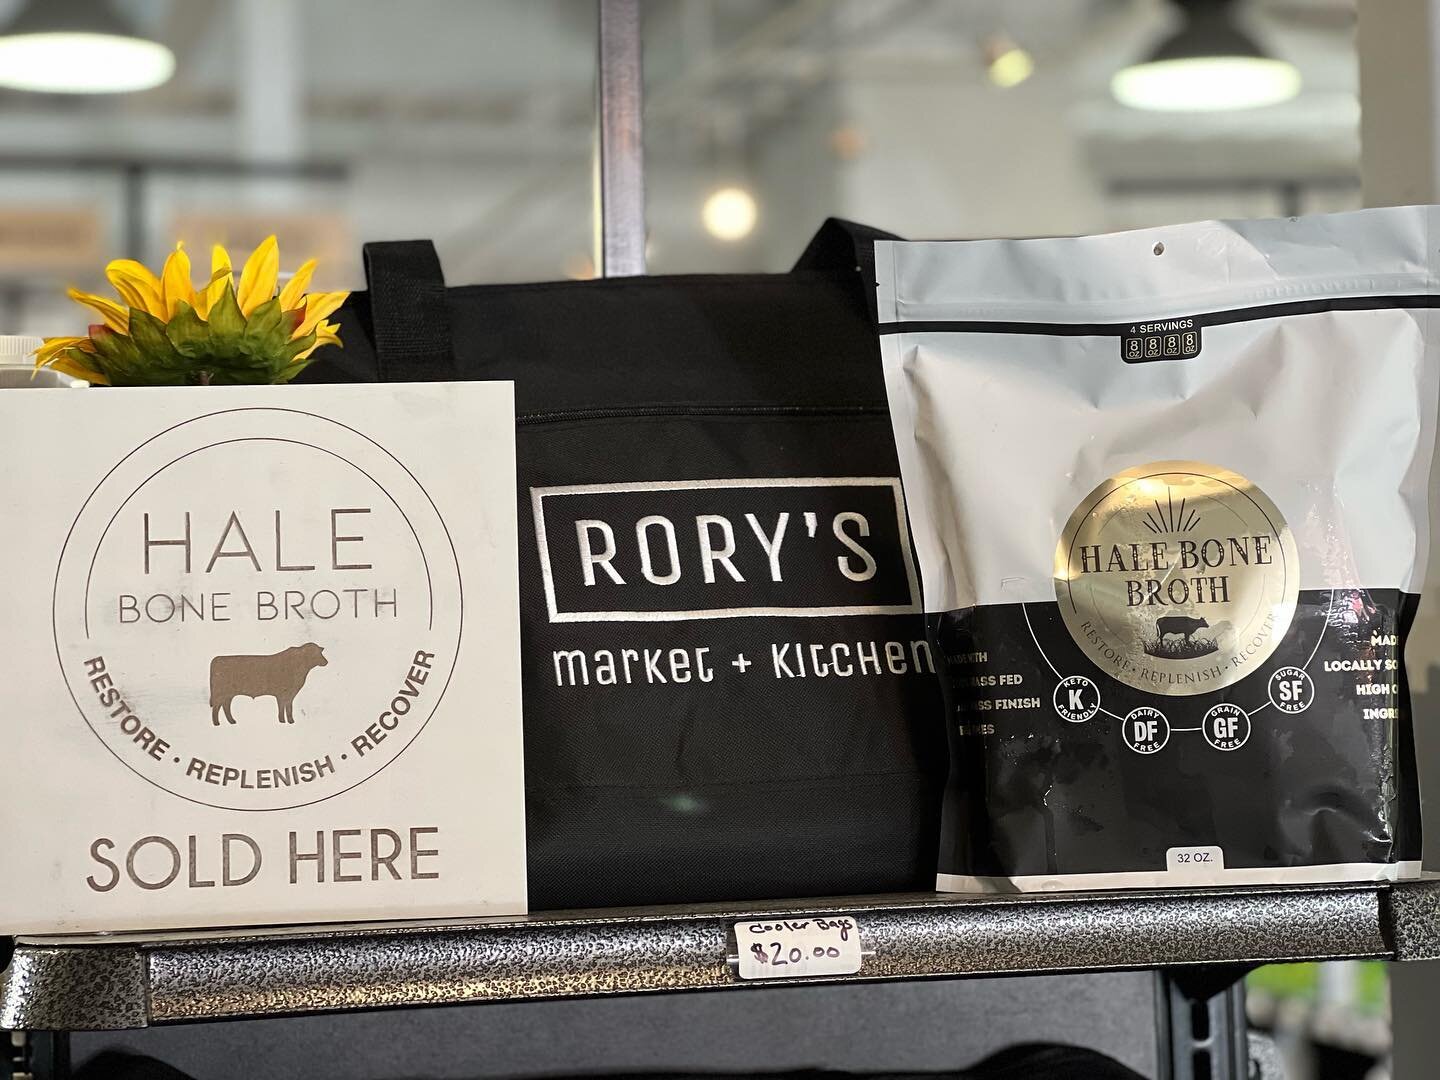 Headed to Cape Cod  this Memorial Day weekend? Swing by Rory&rsquo;s @iloverorys in Mashpee and stock up on all your favorite fresh foods, shop local and grab a bag of Hale Bone Broth to help you stay replenished this long weekend! #memorialday #holi